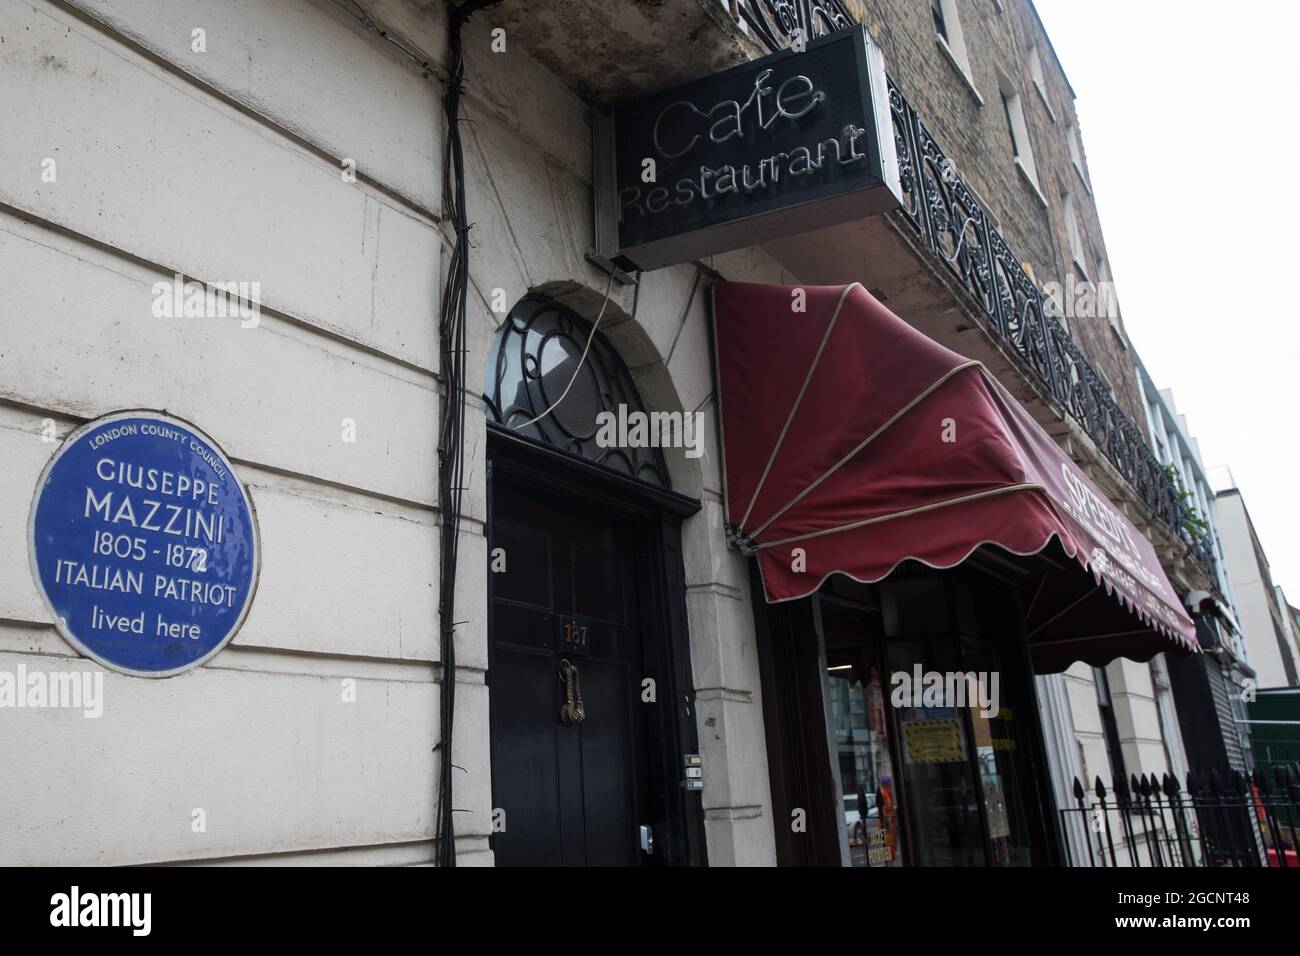 London, UK. 5th August, 2021. A blue ceramic plaque bears Giuseppe Mazzini's name. It was installed in honour of the Italian patriot at 183 North Gower Street in Bloomsbury by London County Council in 1950. Credit: Mark Kerrison/Alamy Live News Stock Photo